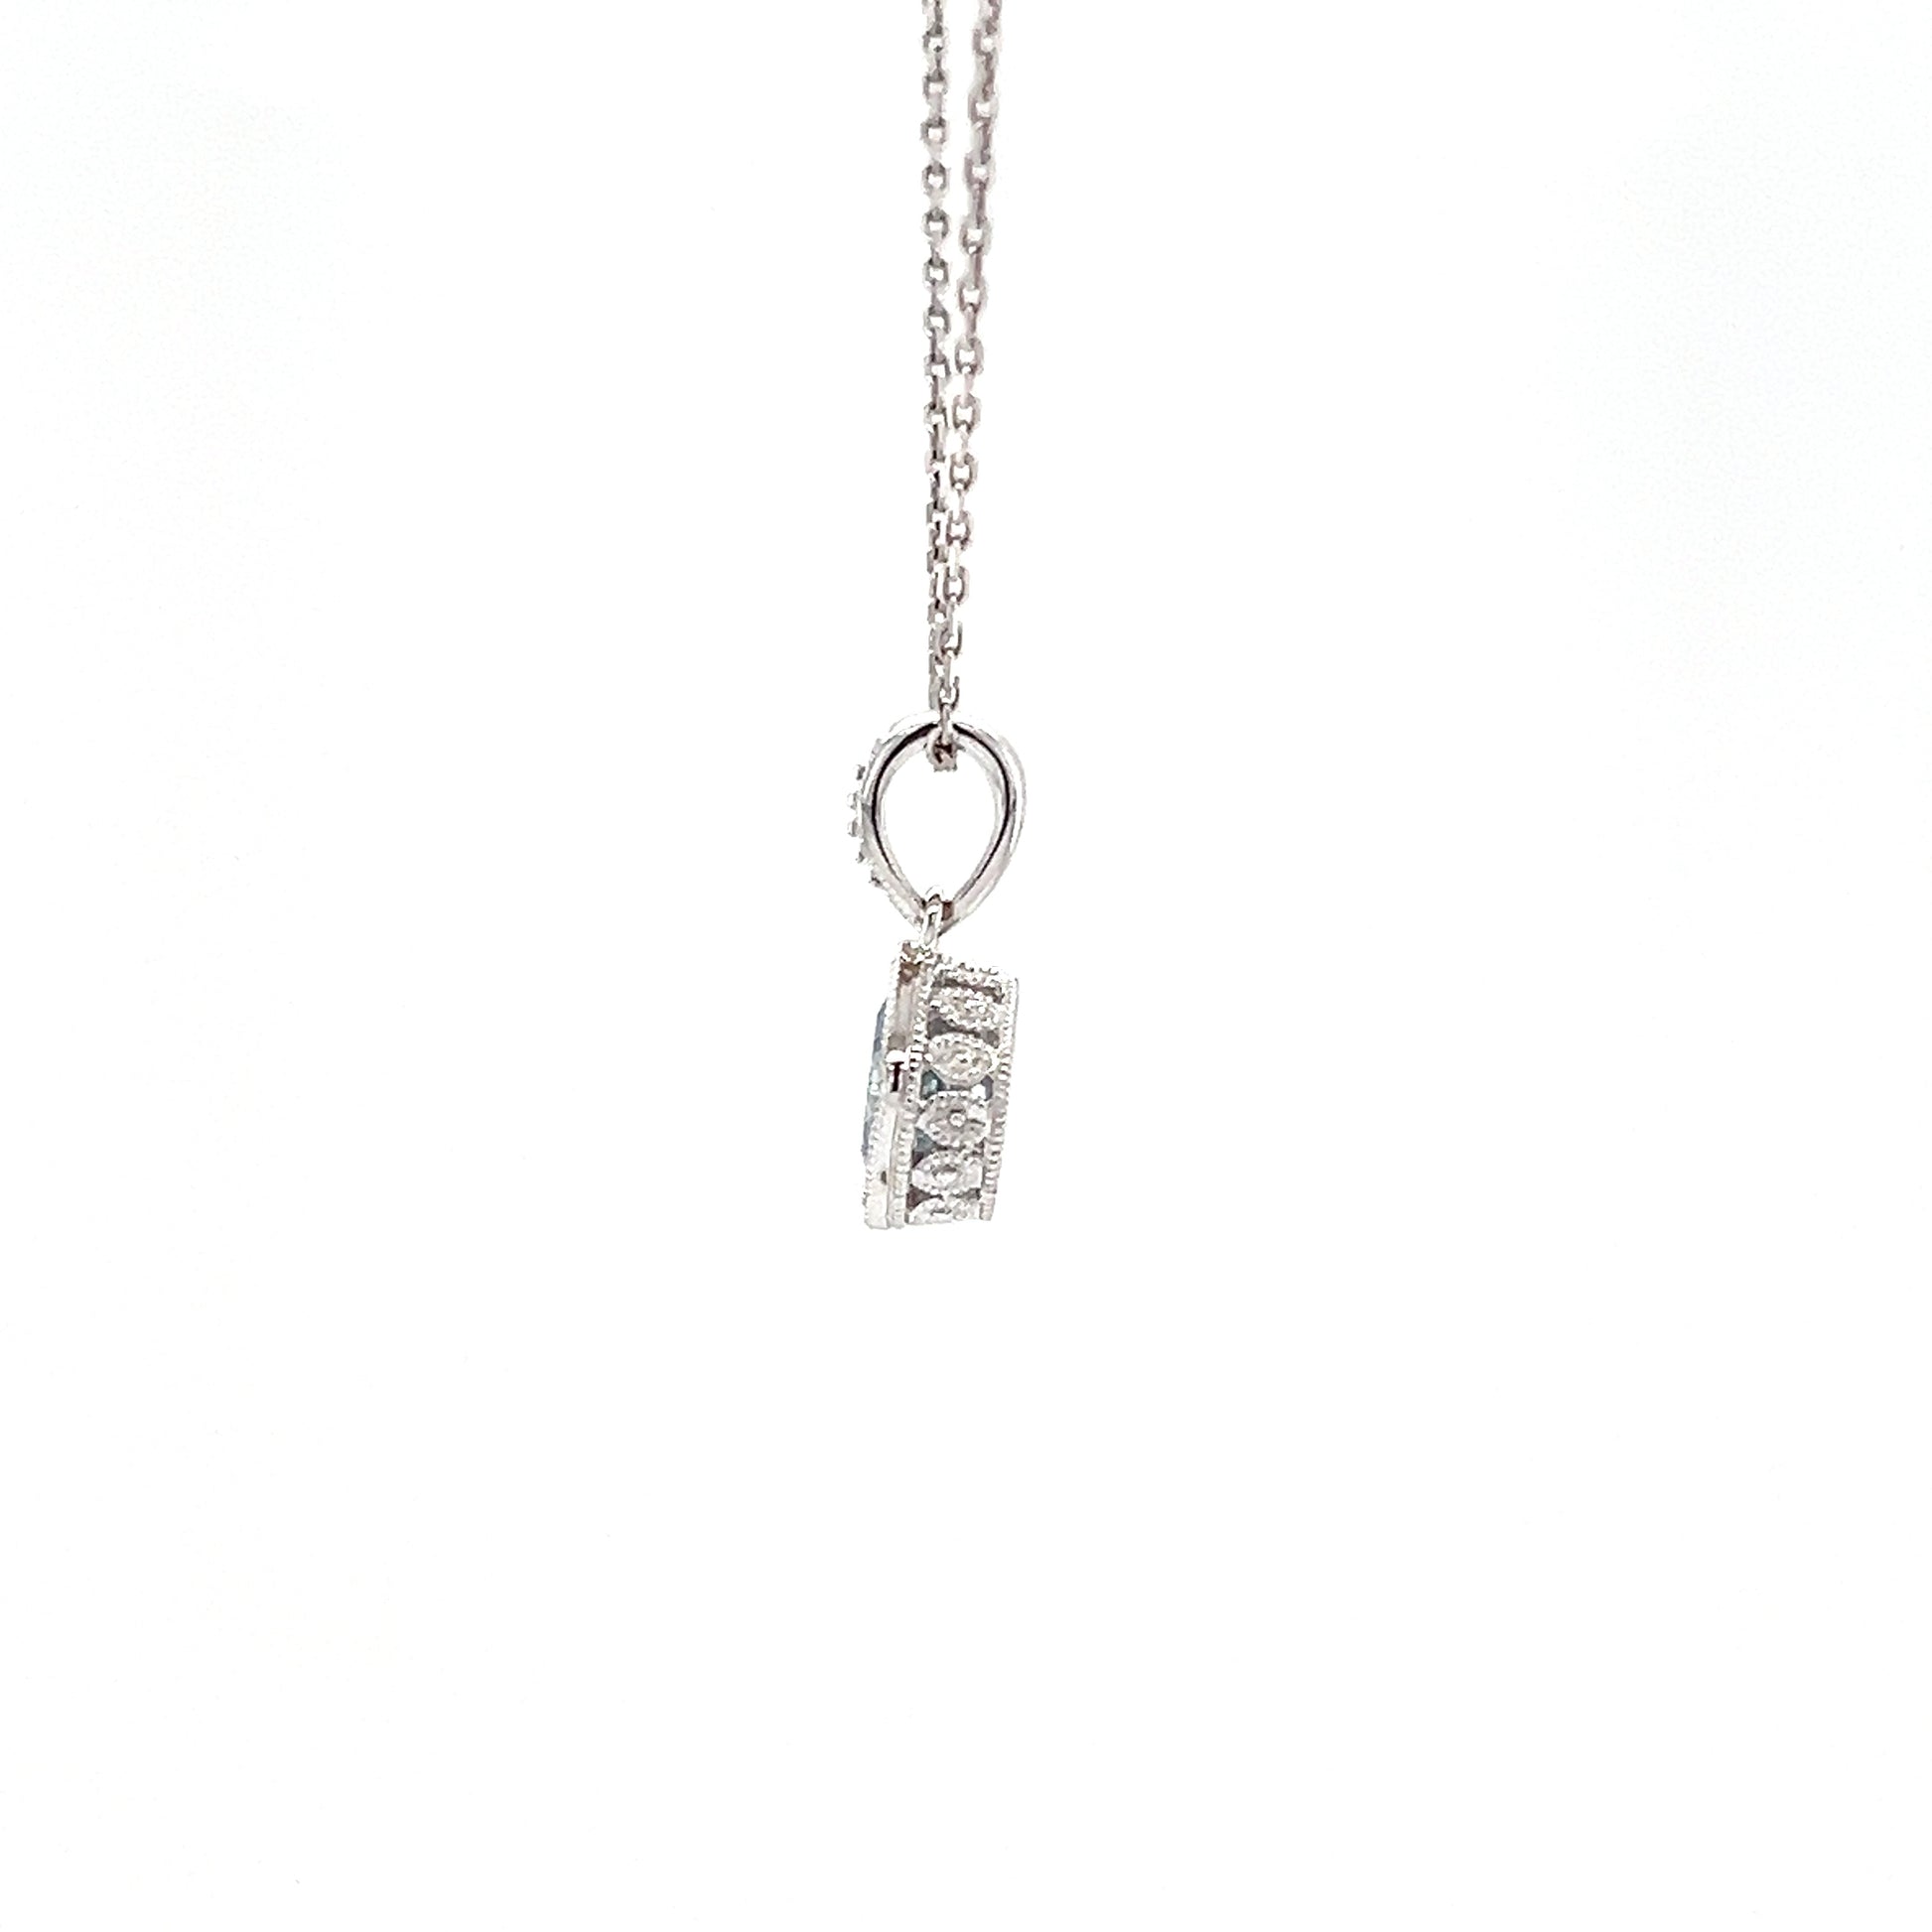 Cushion Aquamarine Pendant with Filigree and Milgrain Details in 14K White Gold Right Profile View